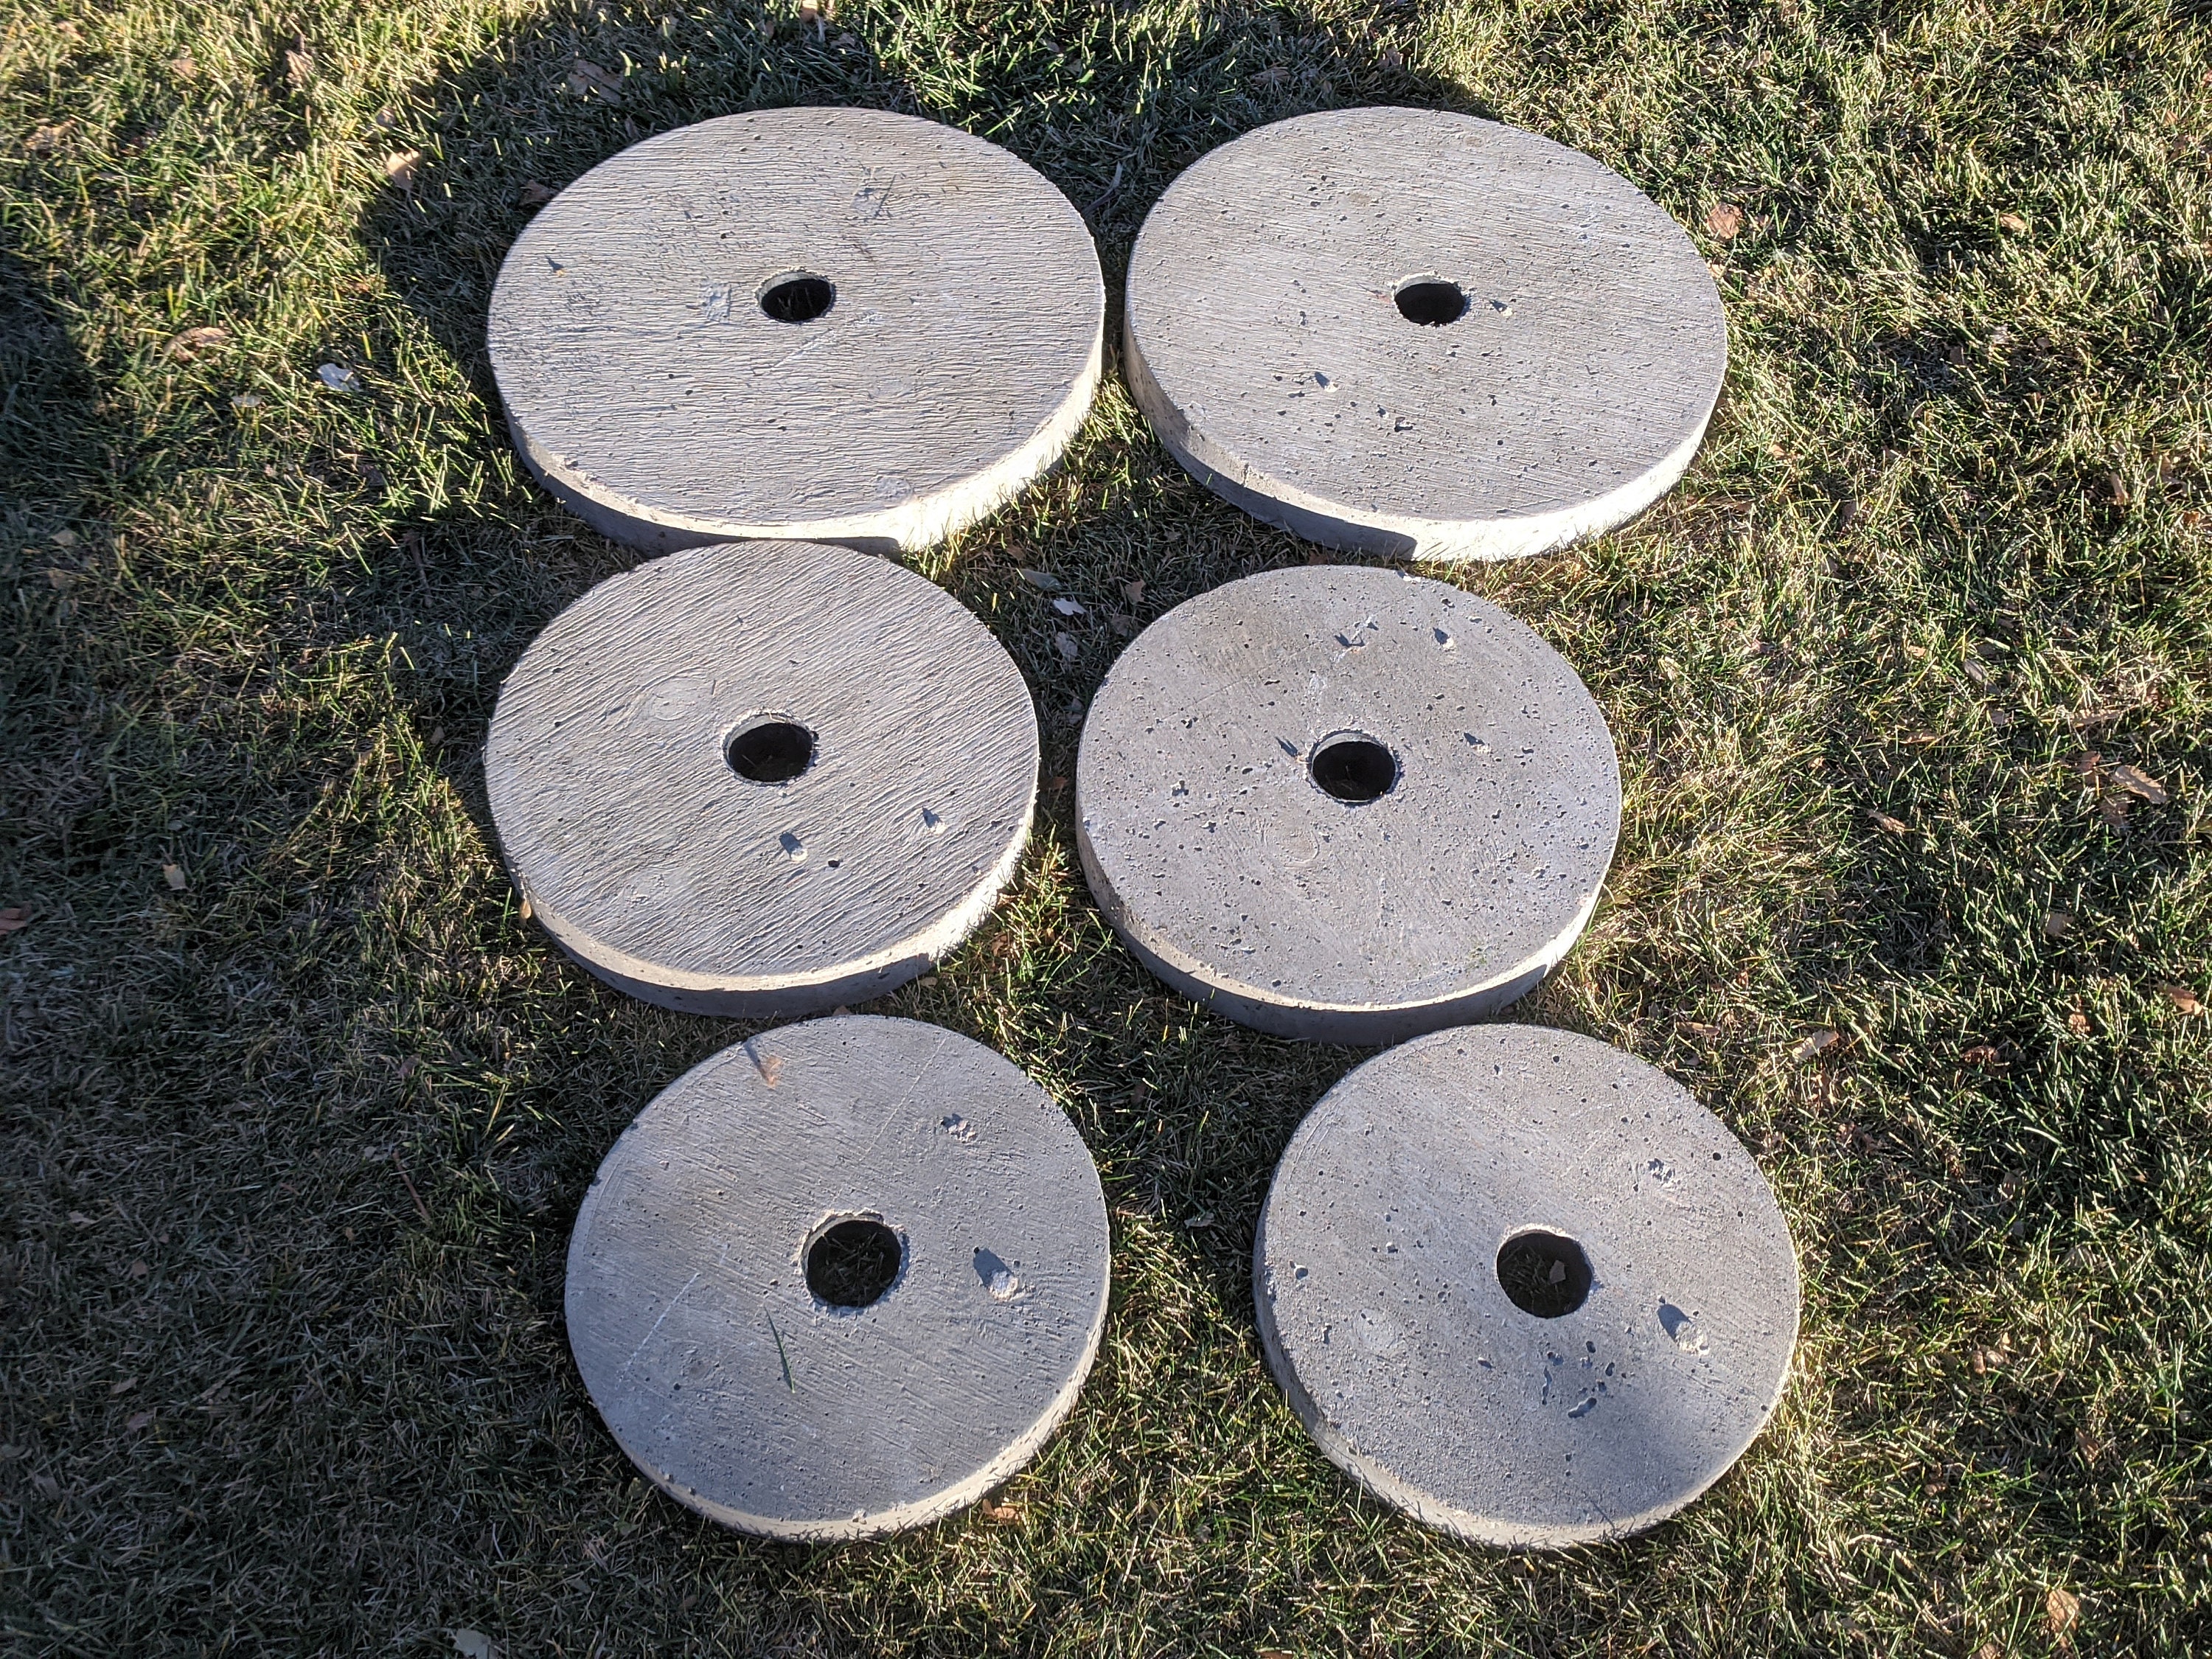 2 Pvc Sleeves for Olympic Barbell and Concrete Weight Plates Molds